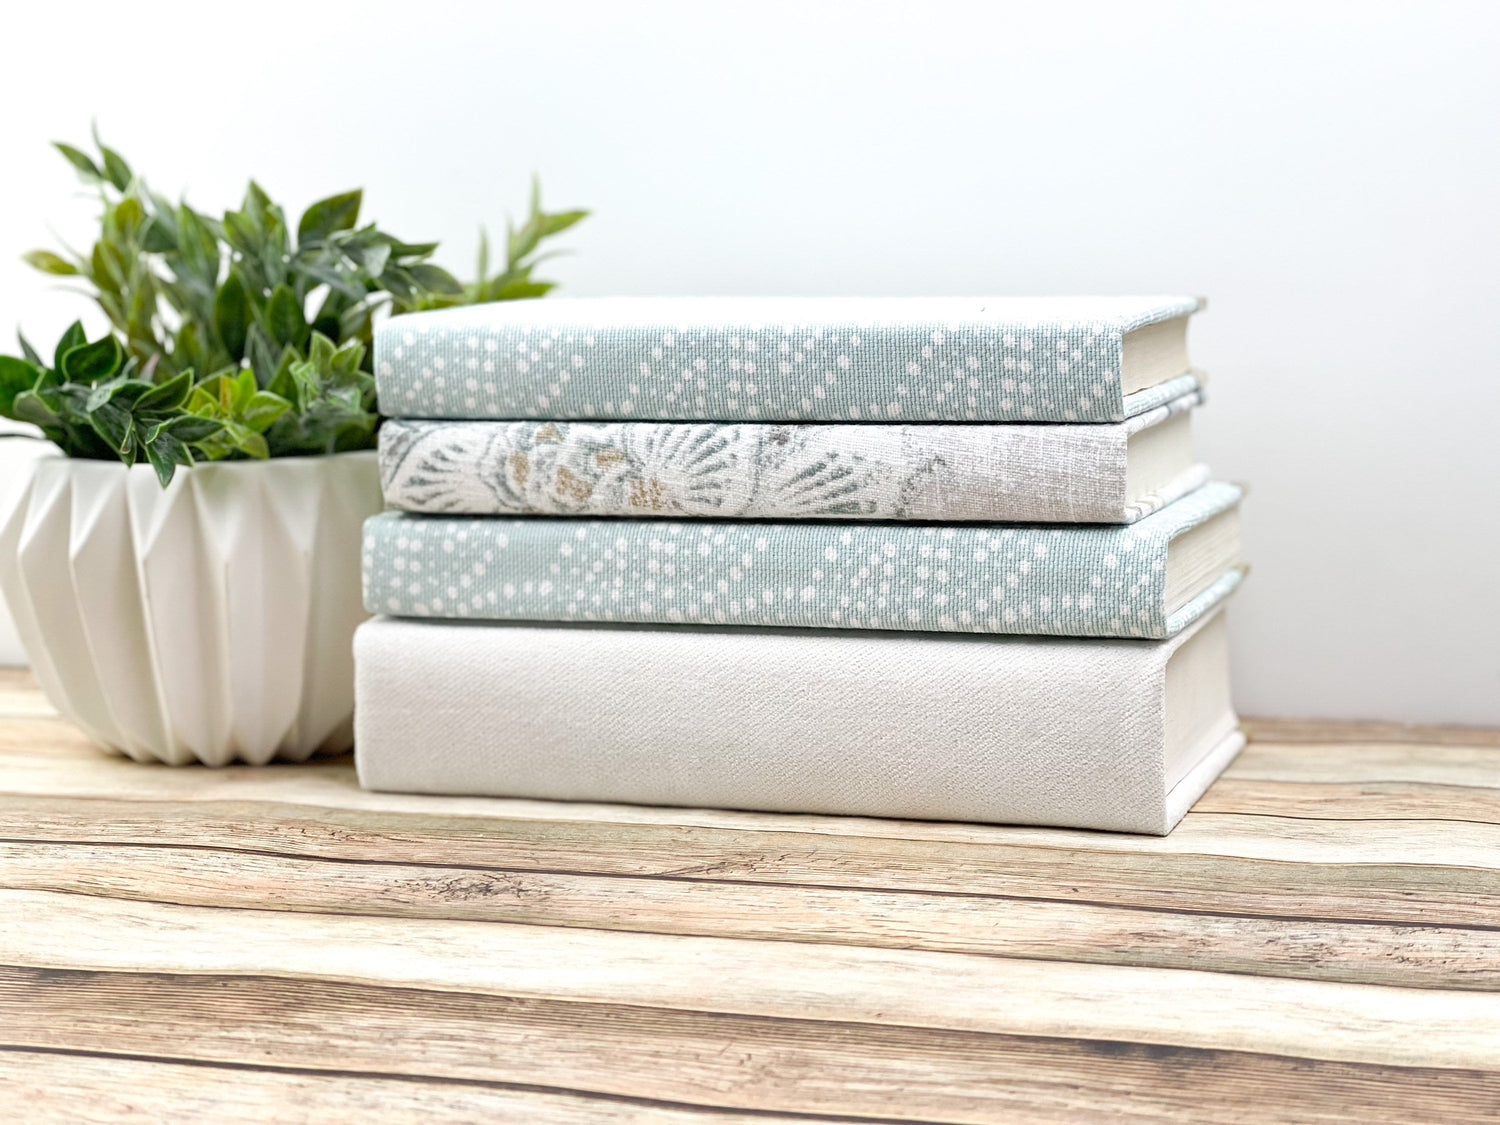 Linen Covered Books for Home Decorative